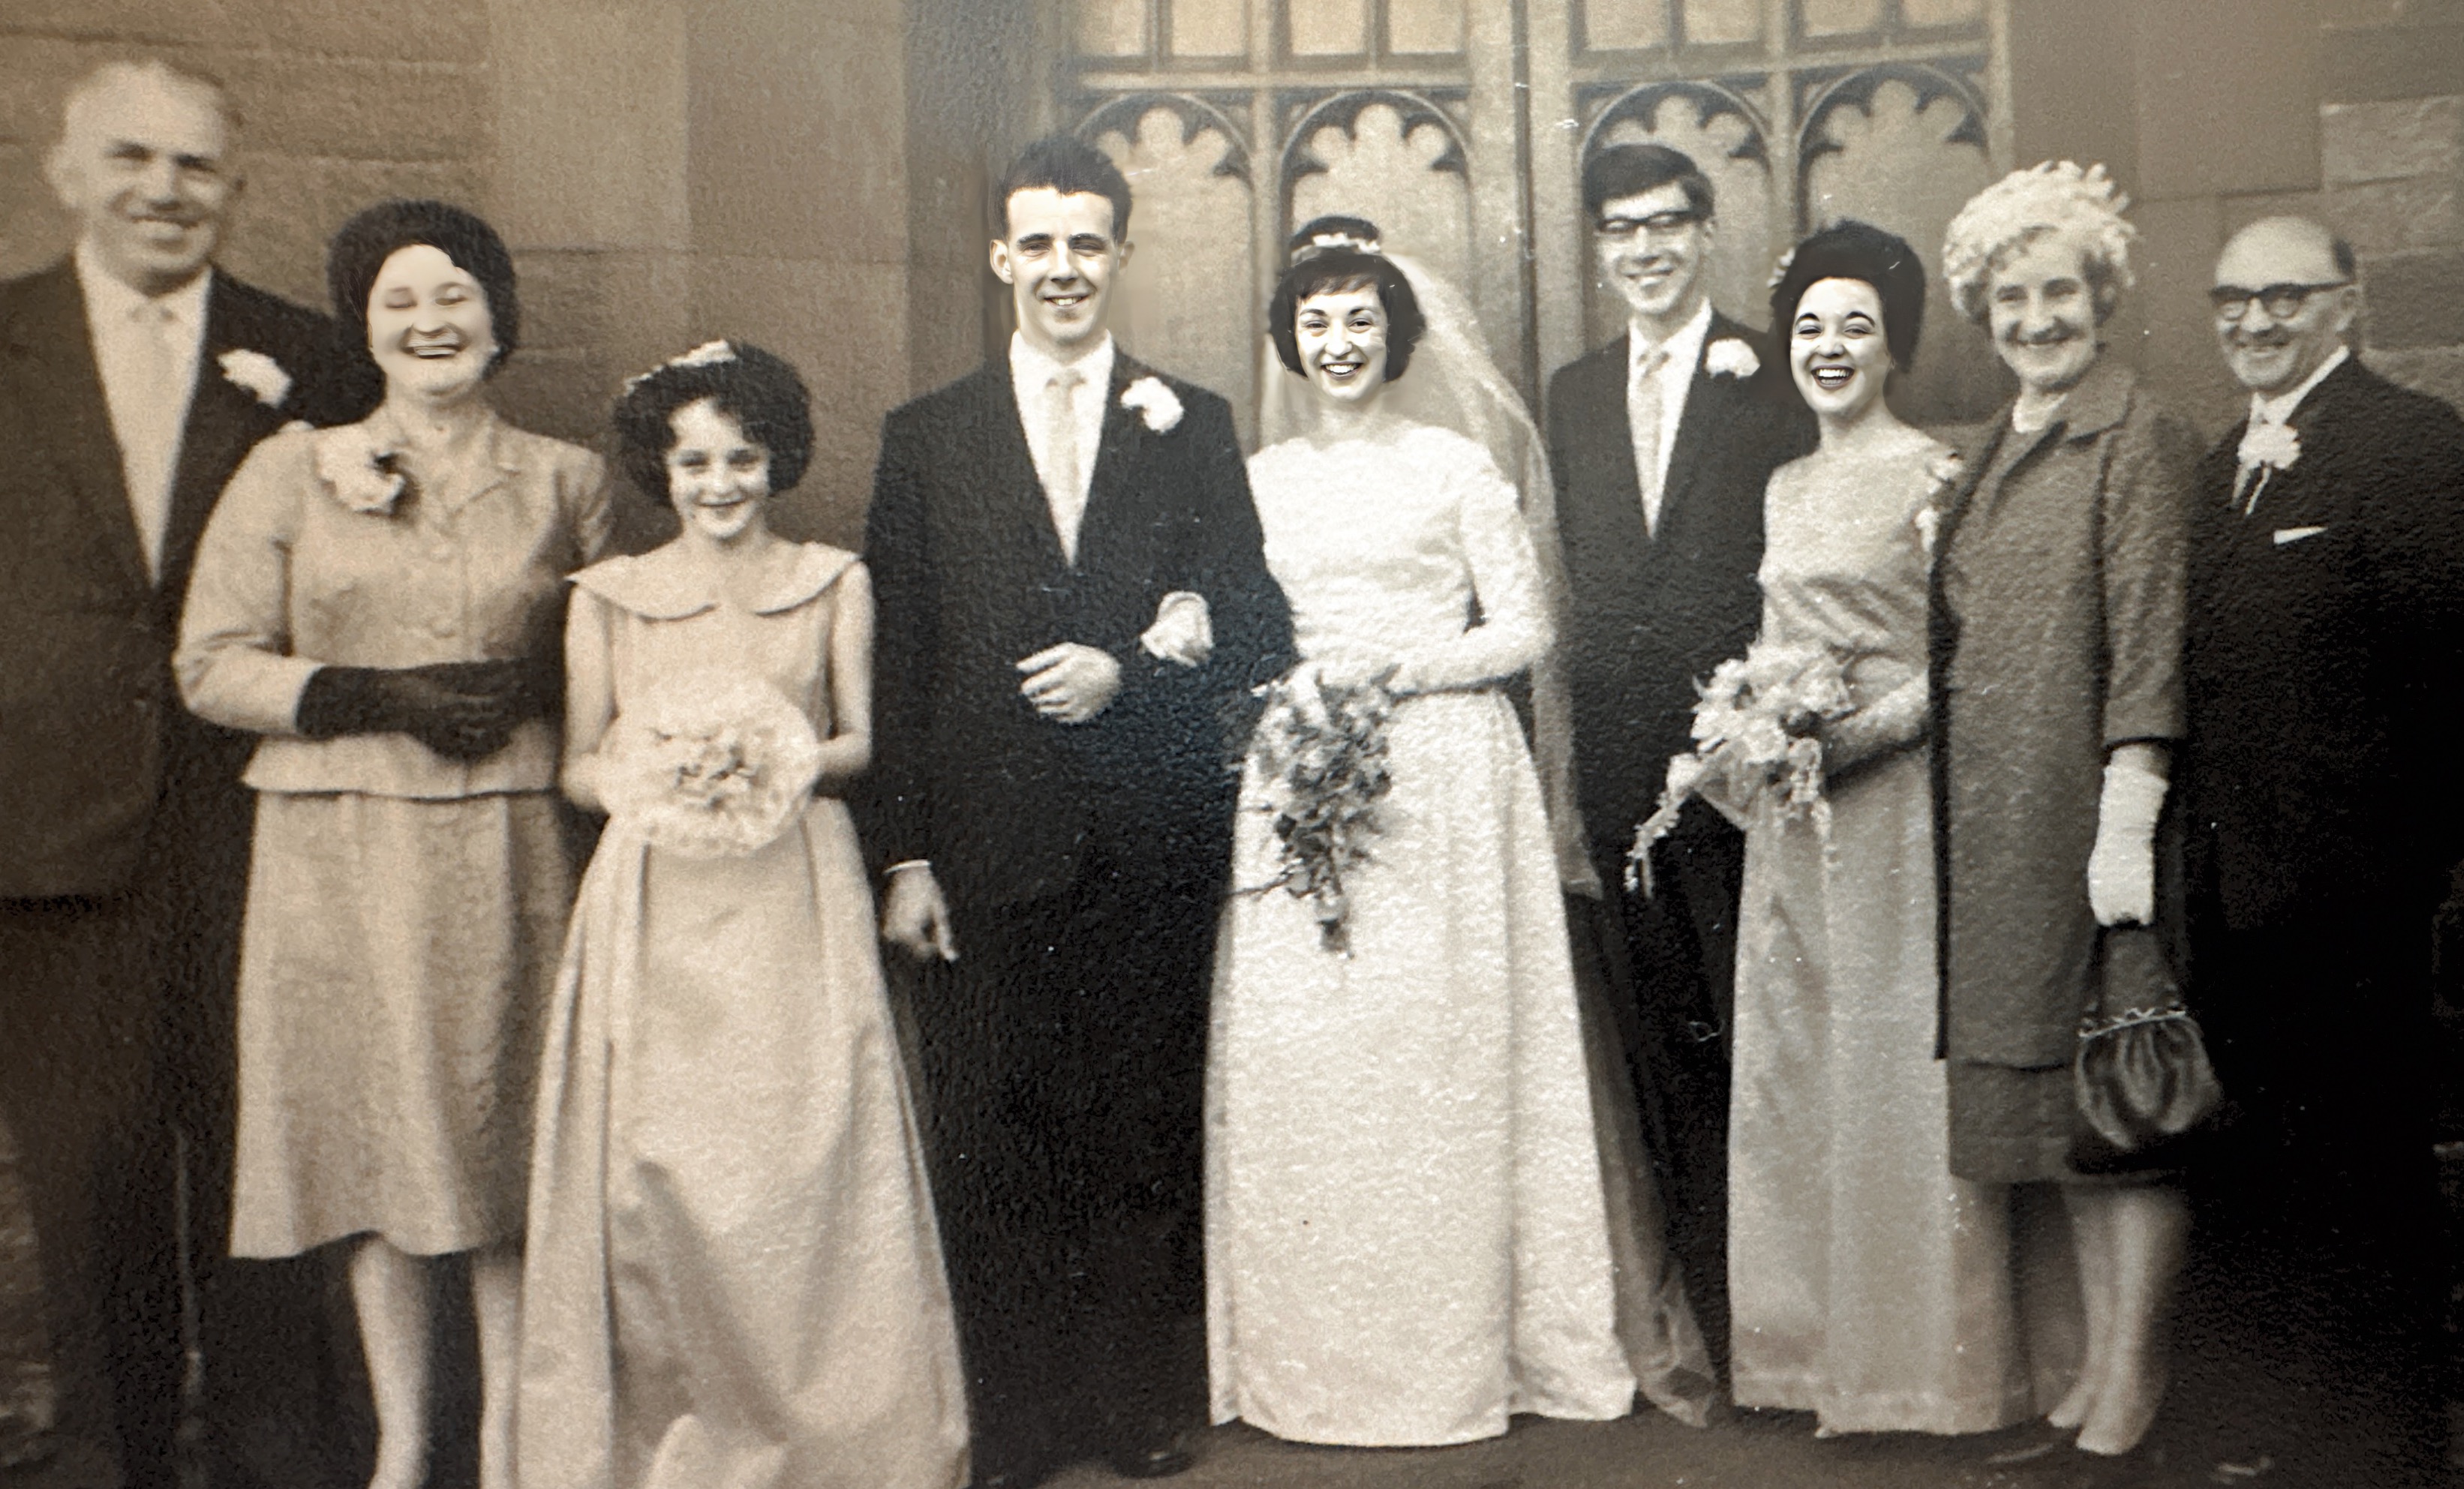 Mum and Dad’s Wedding Day 25th August 1962